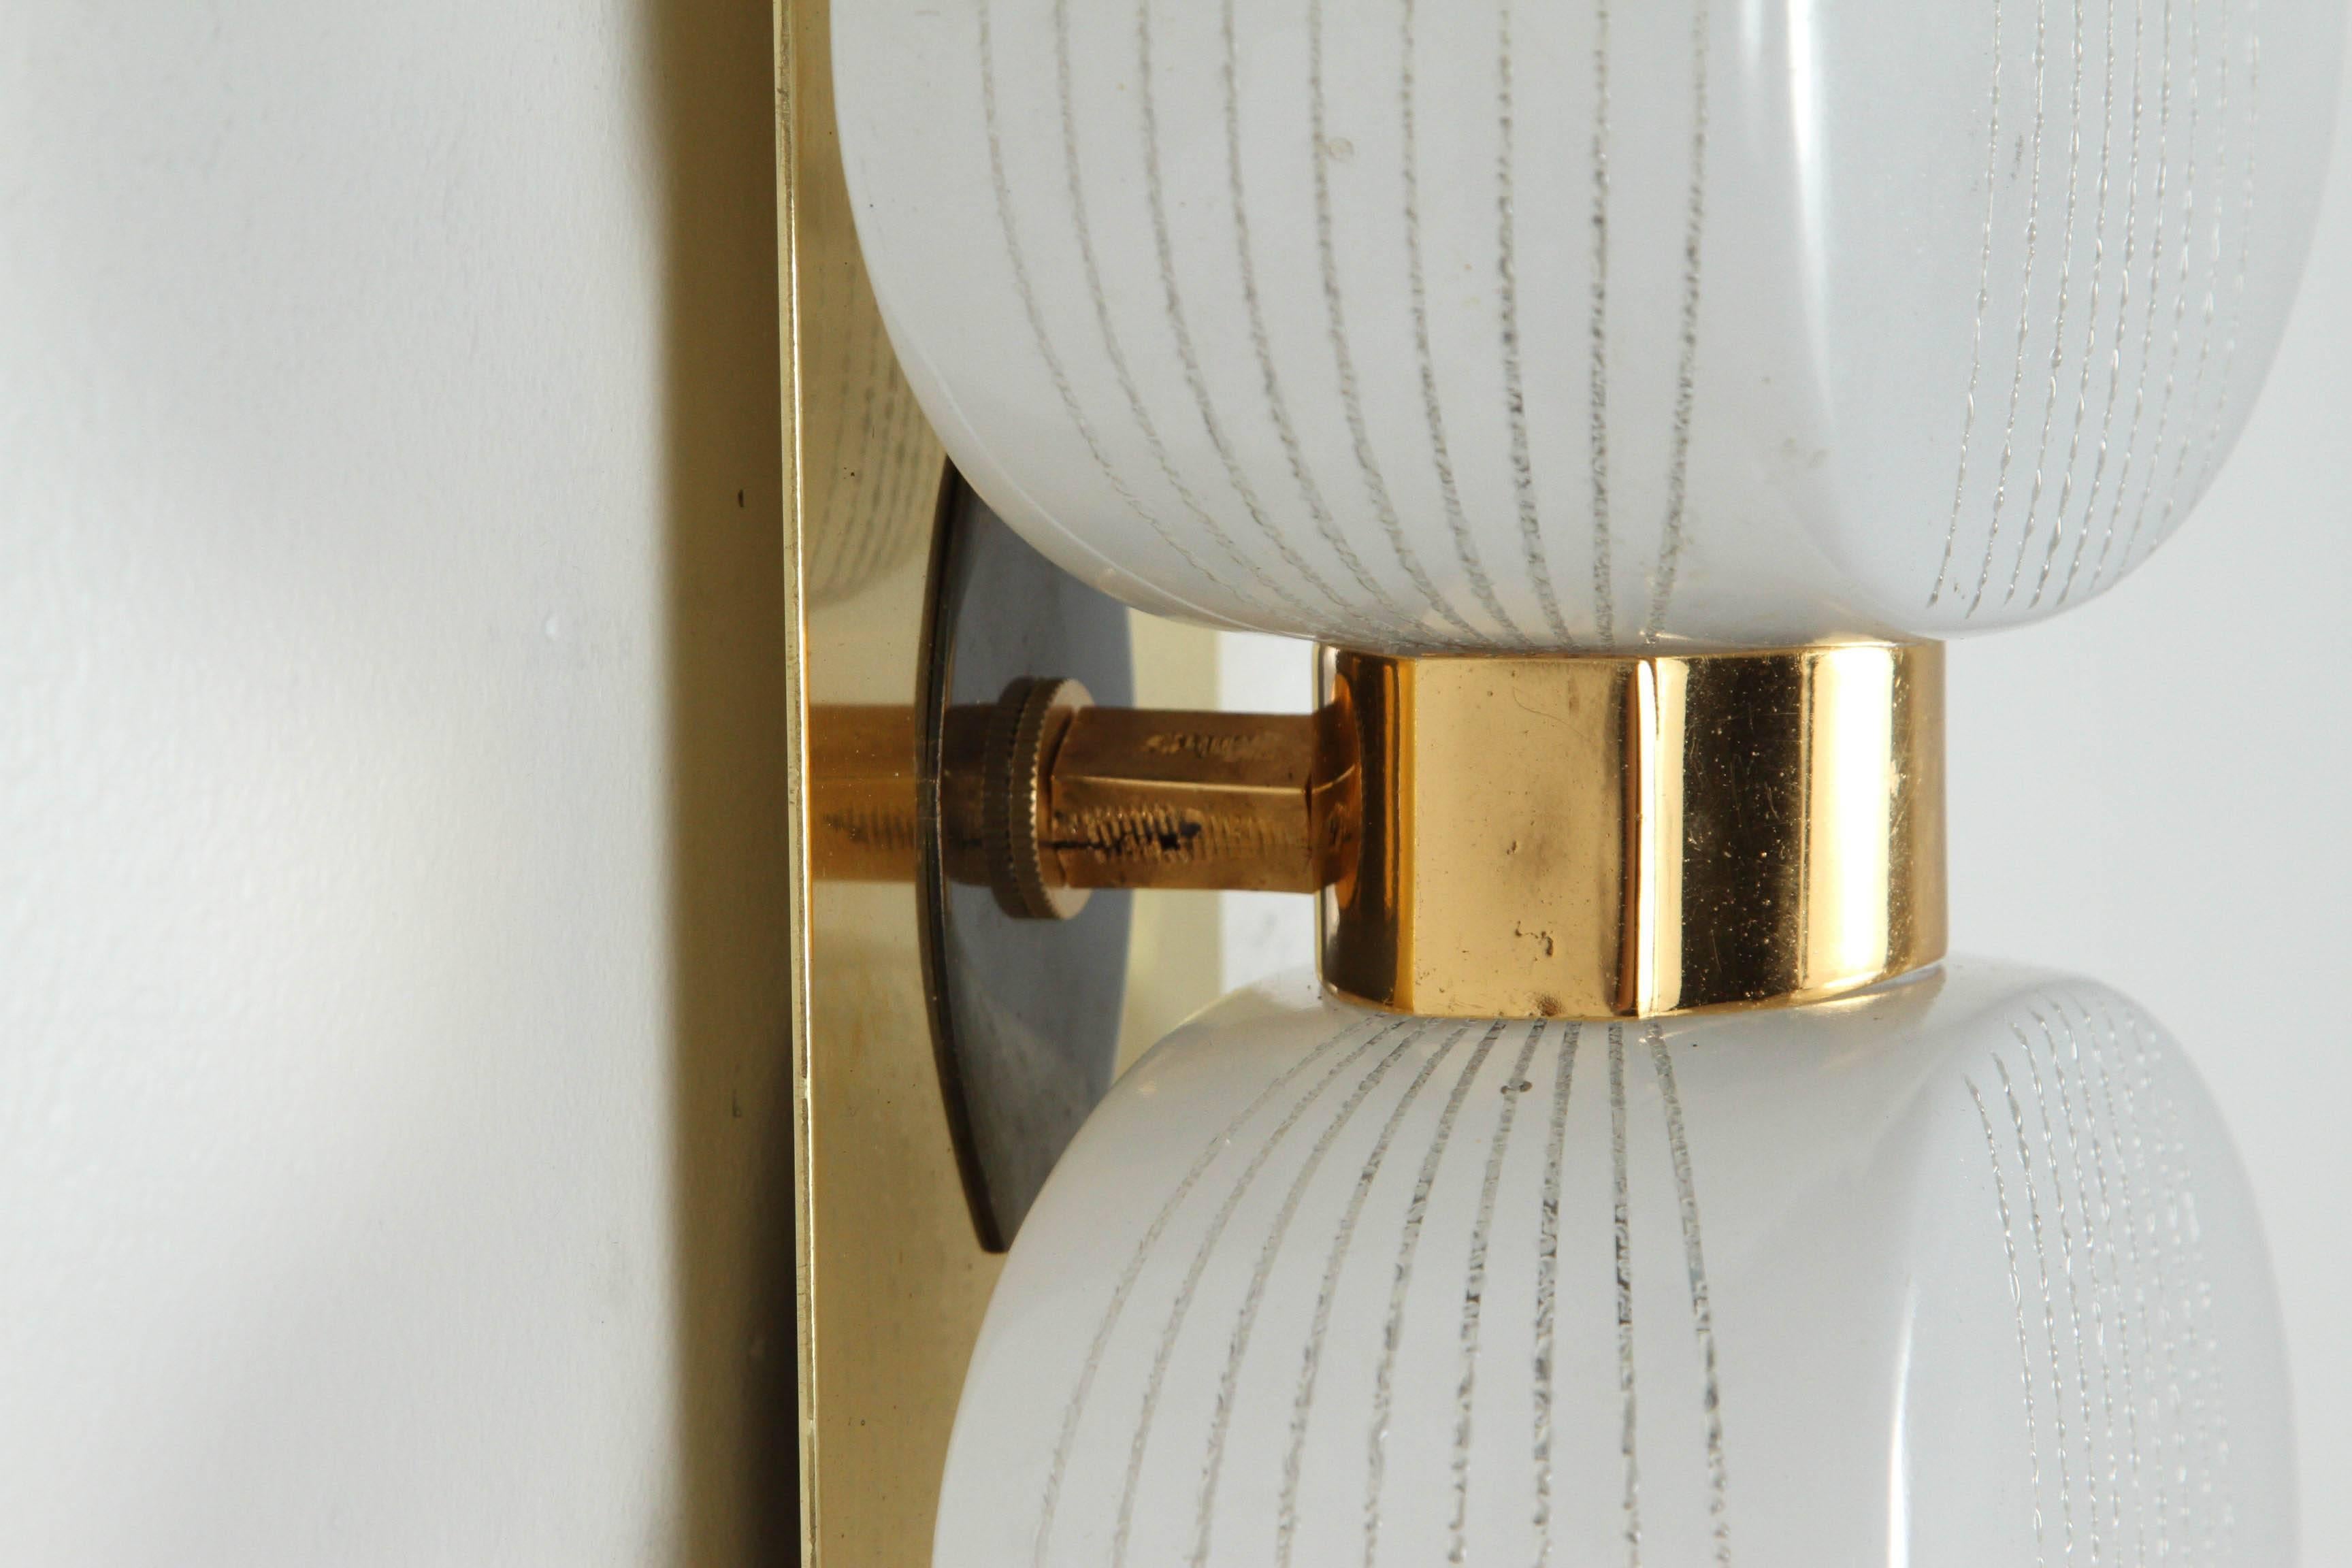 Mid-Century French Sconce 1